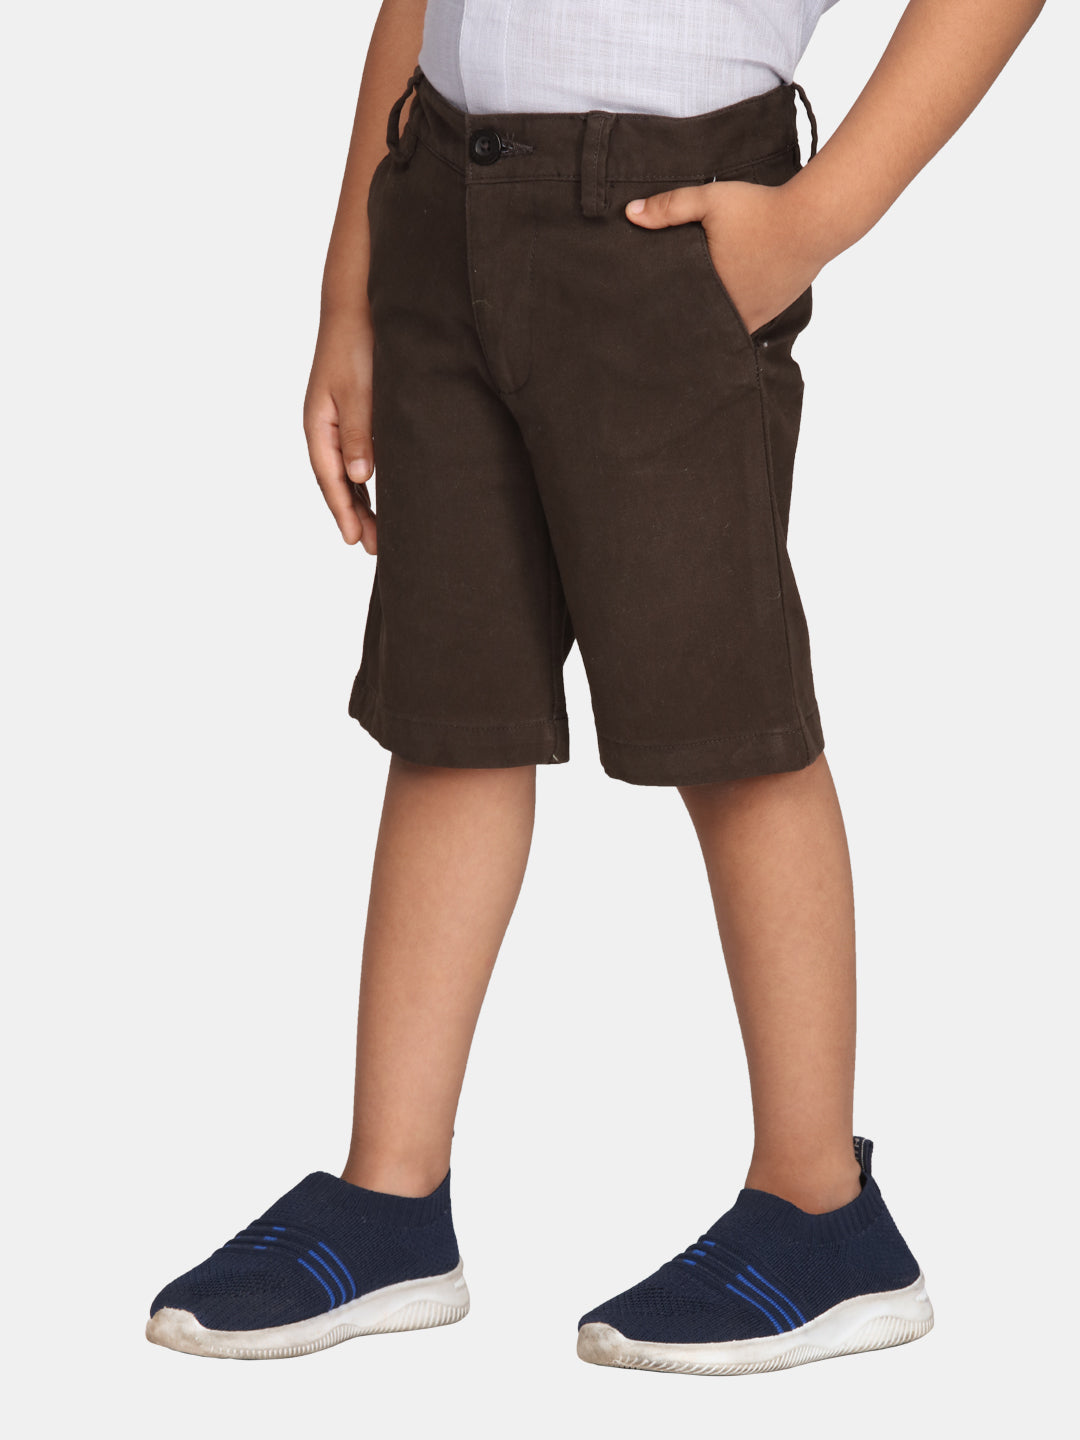 Boys Olive Green Colour Casual Shorts